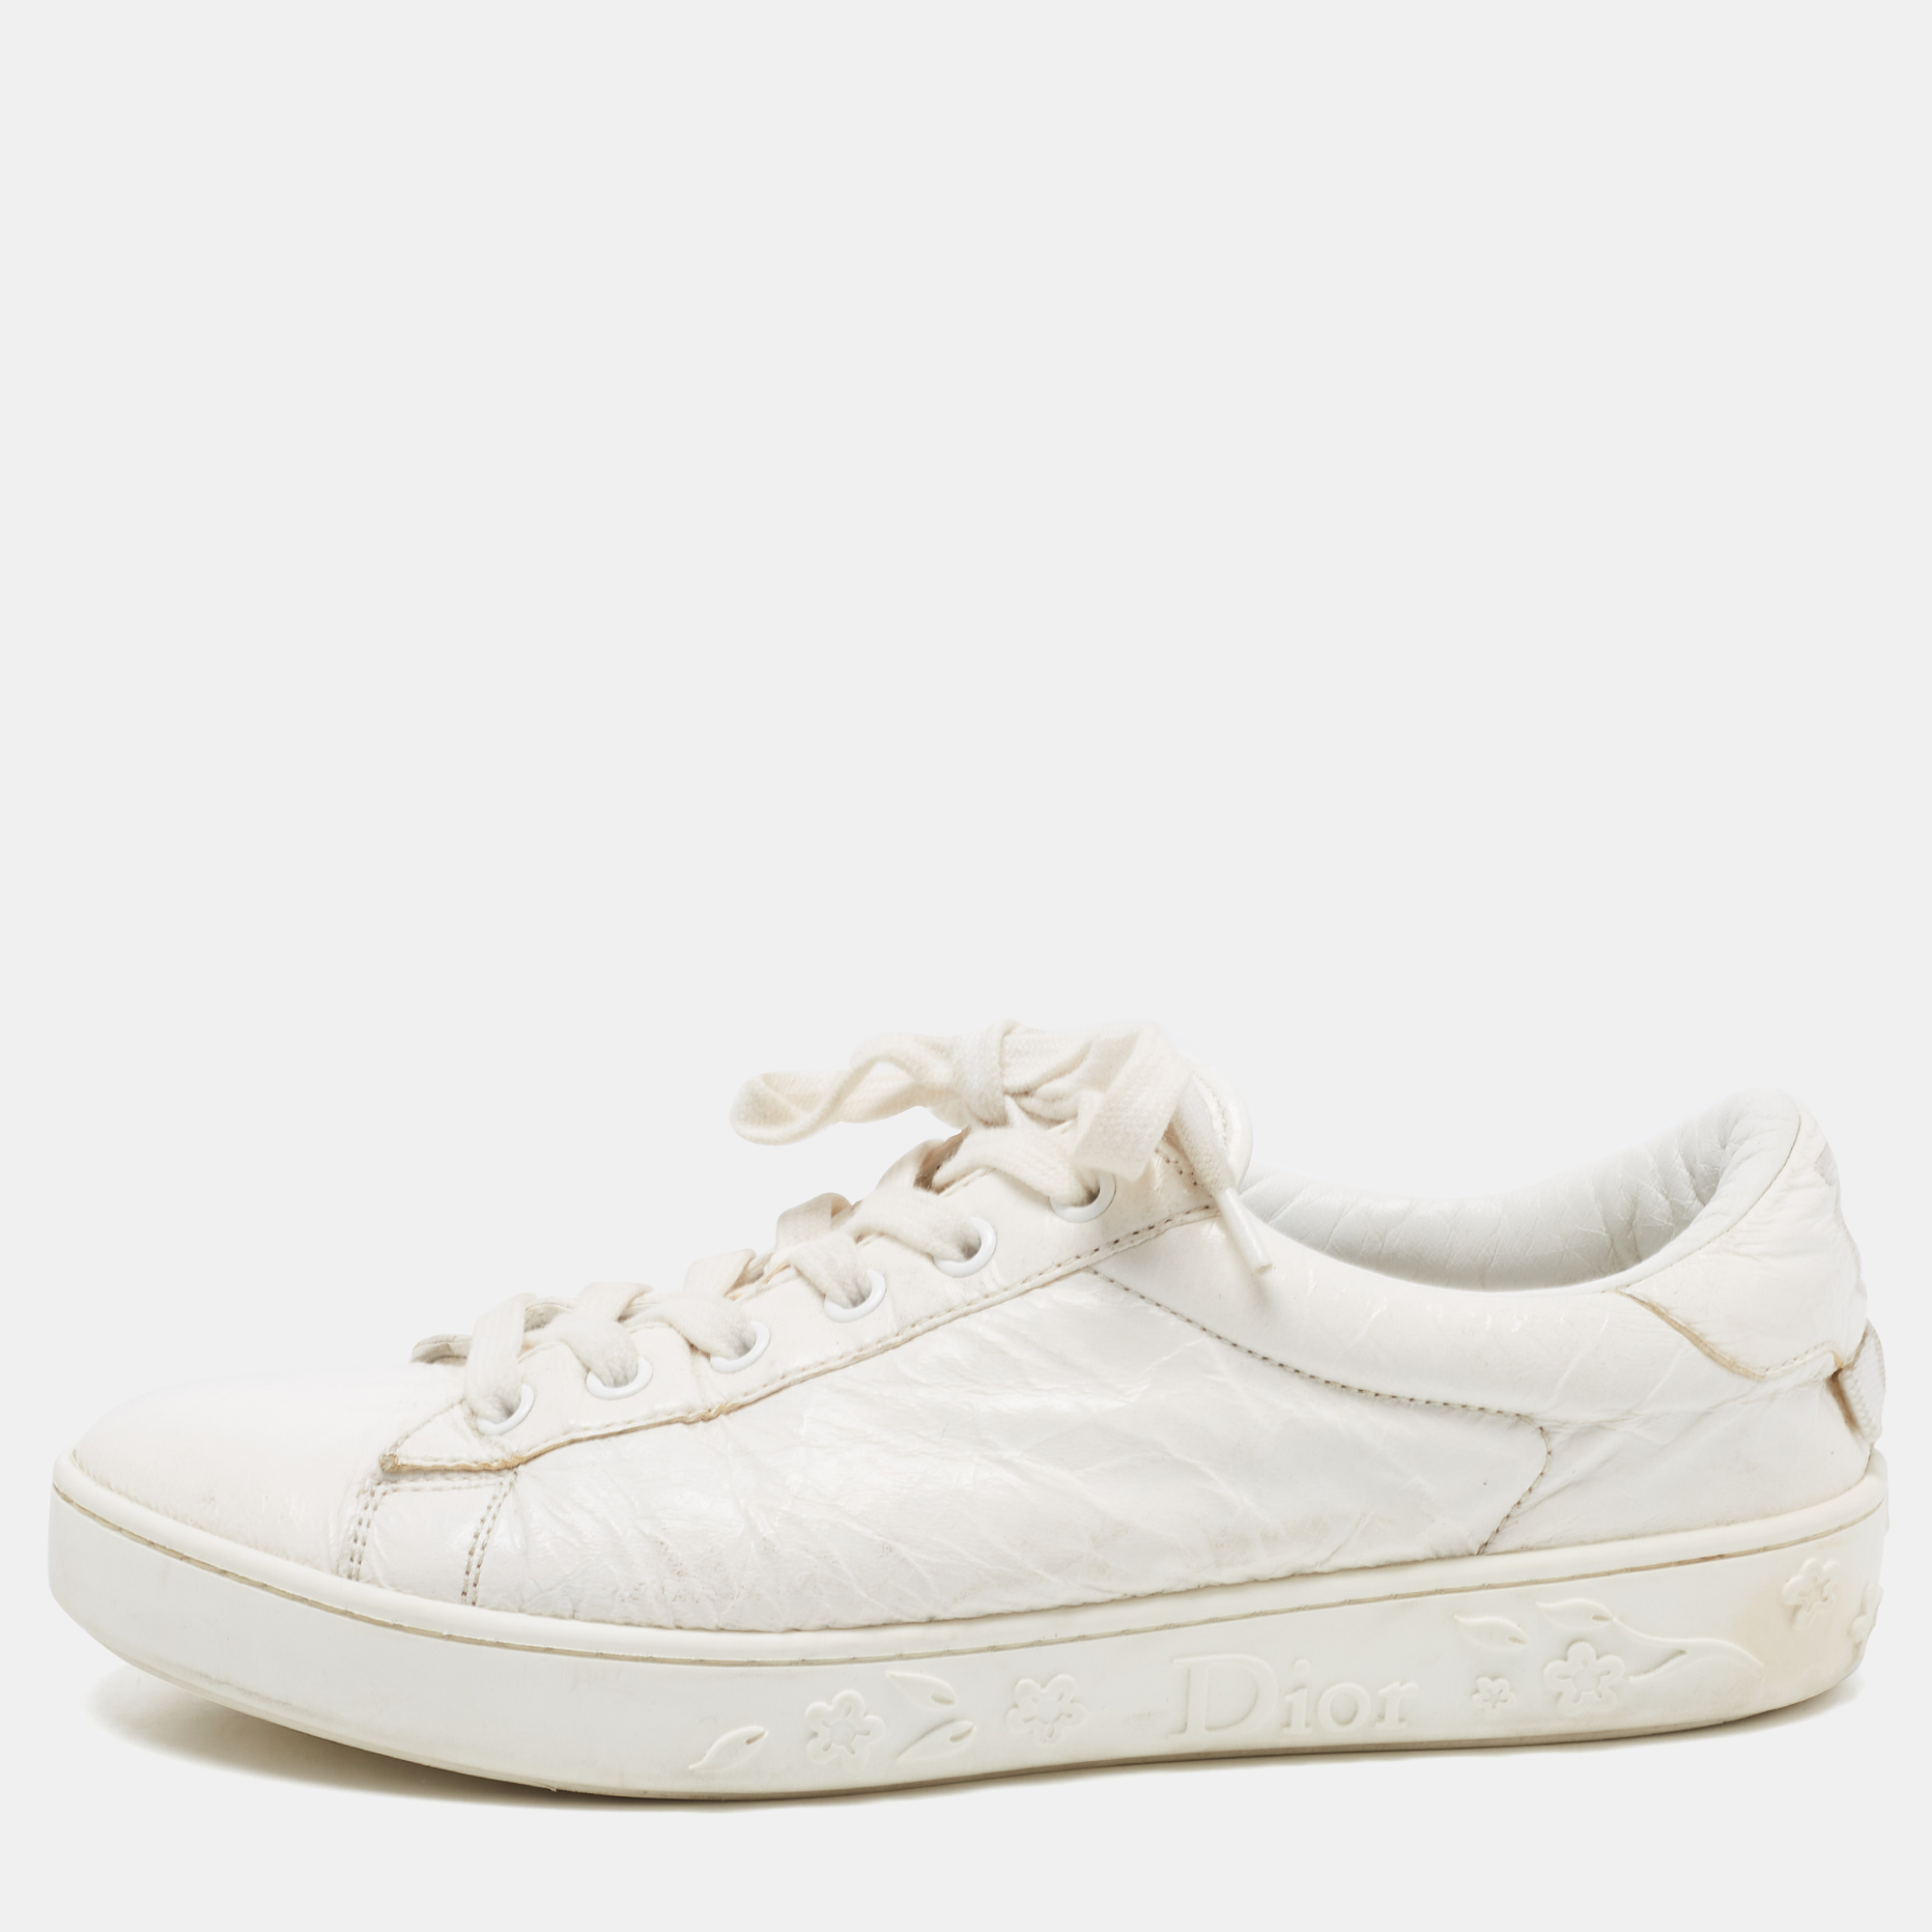 Dior White Crinkled Leather Move Sneakers Size 37.5